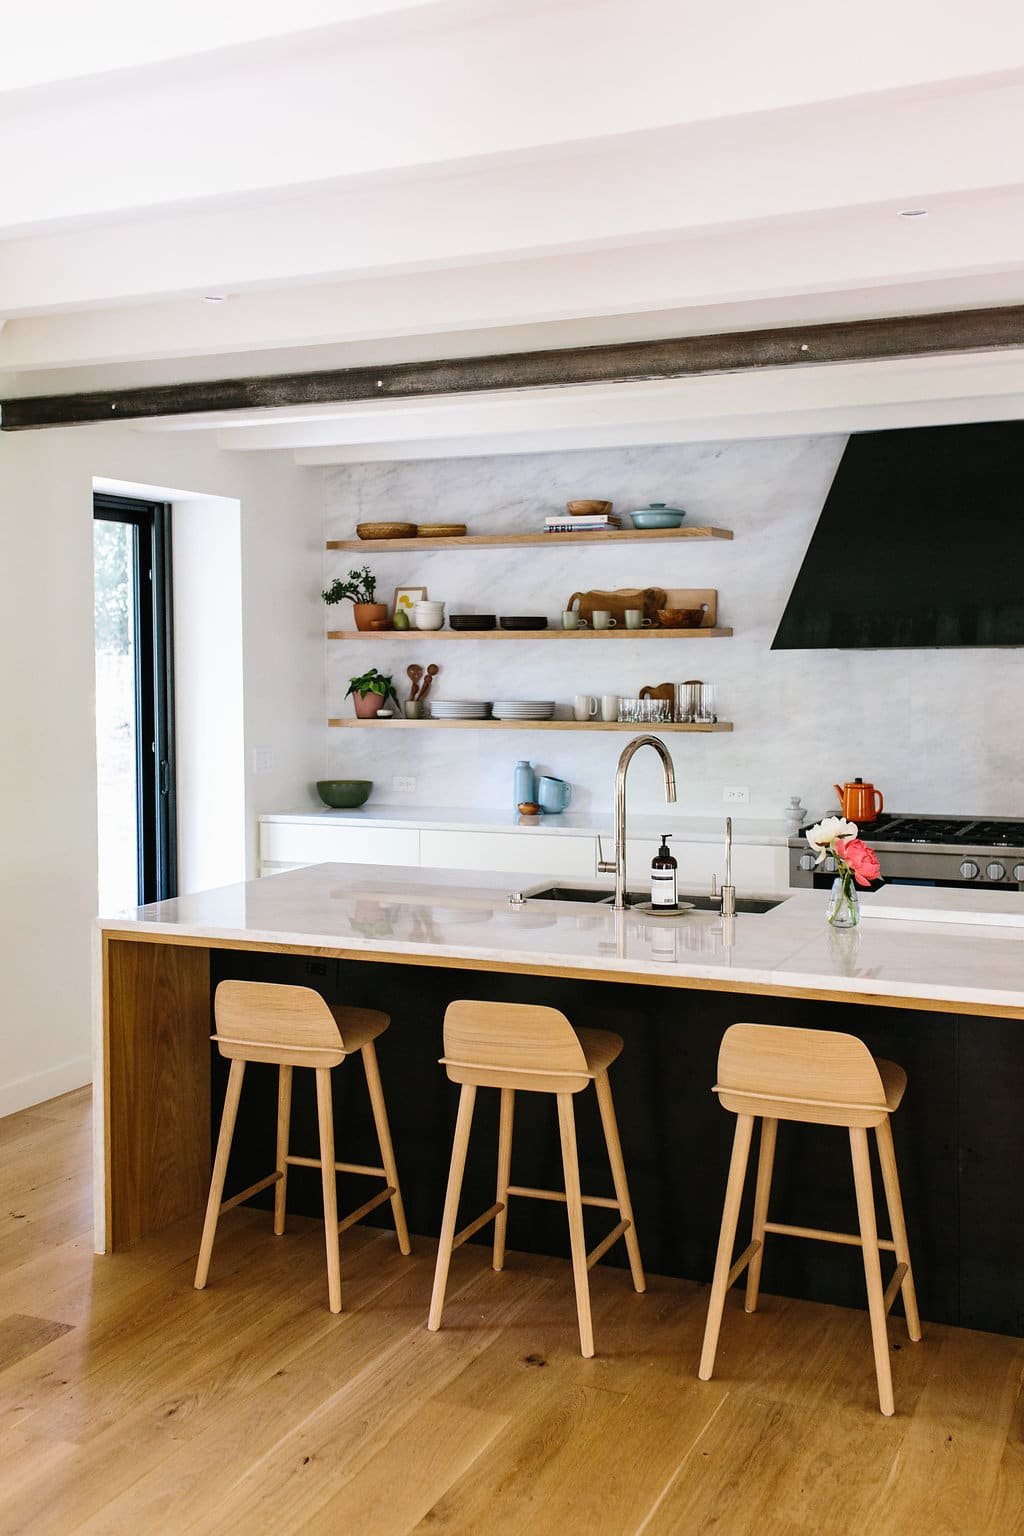 How to Arrange Your Kitchen Décor to Create a Cohesive Look